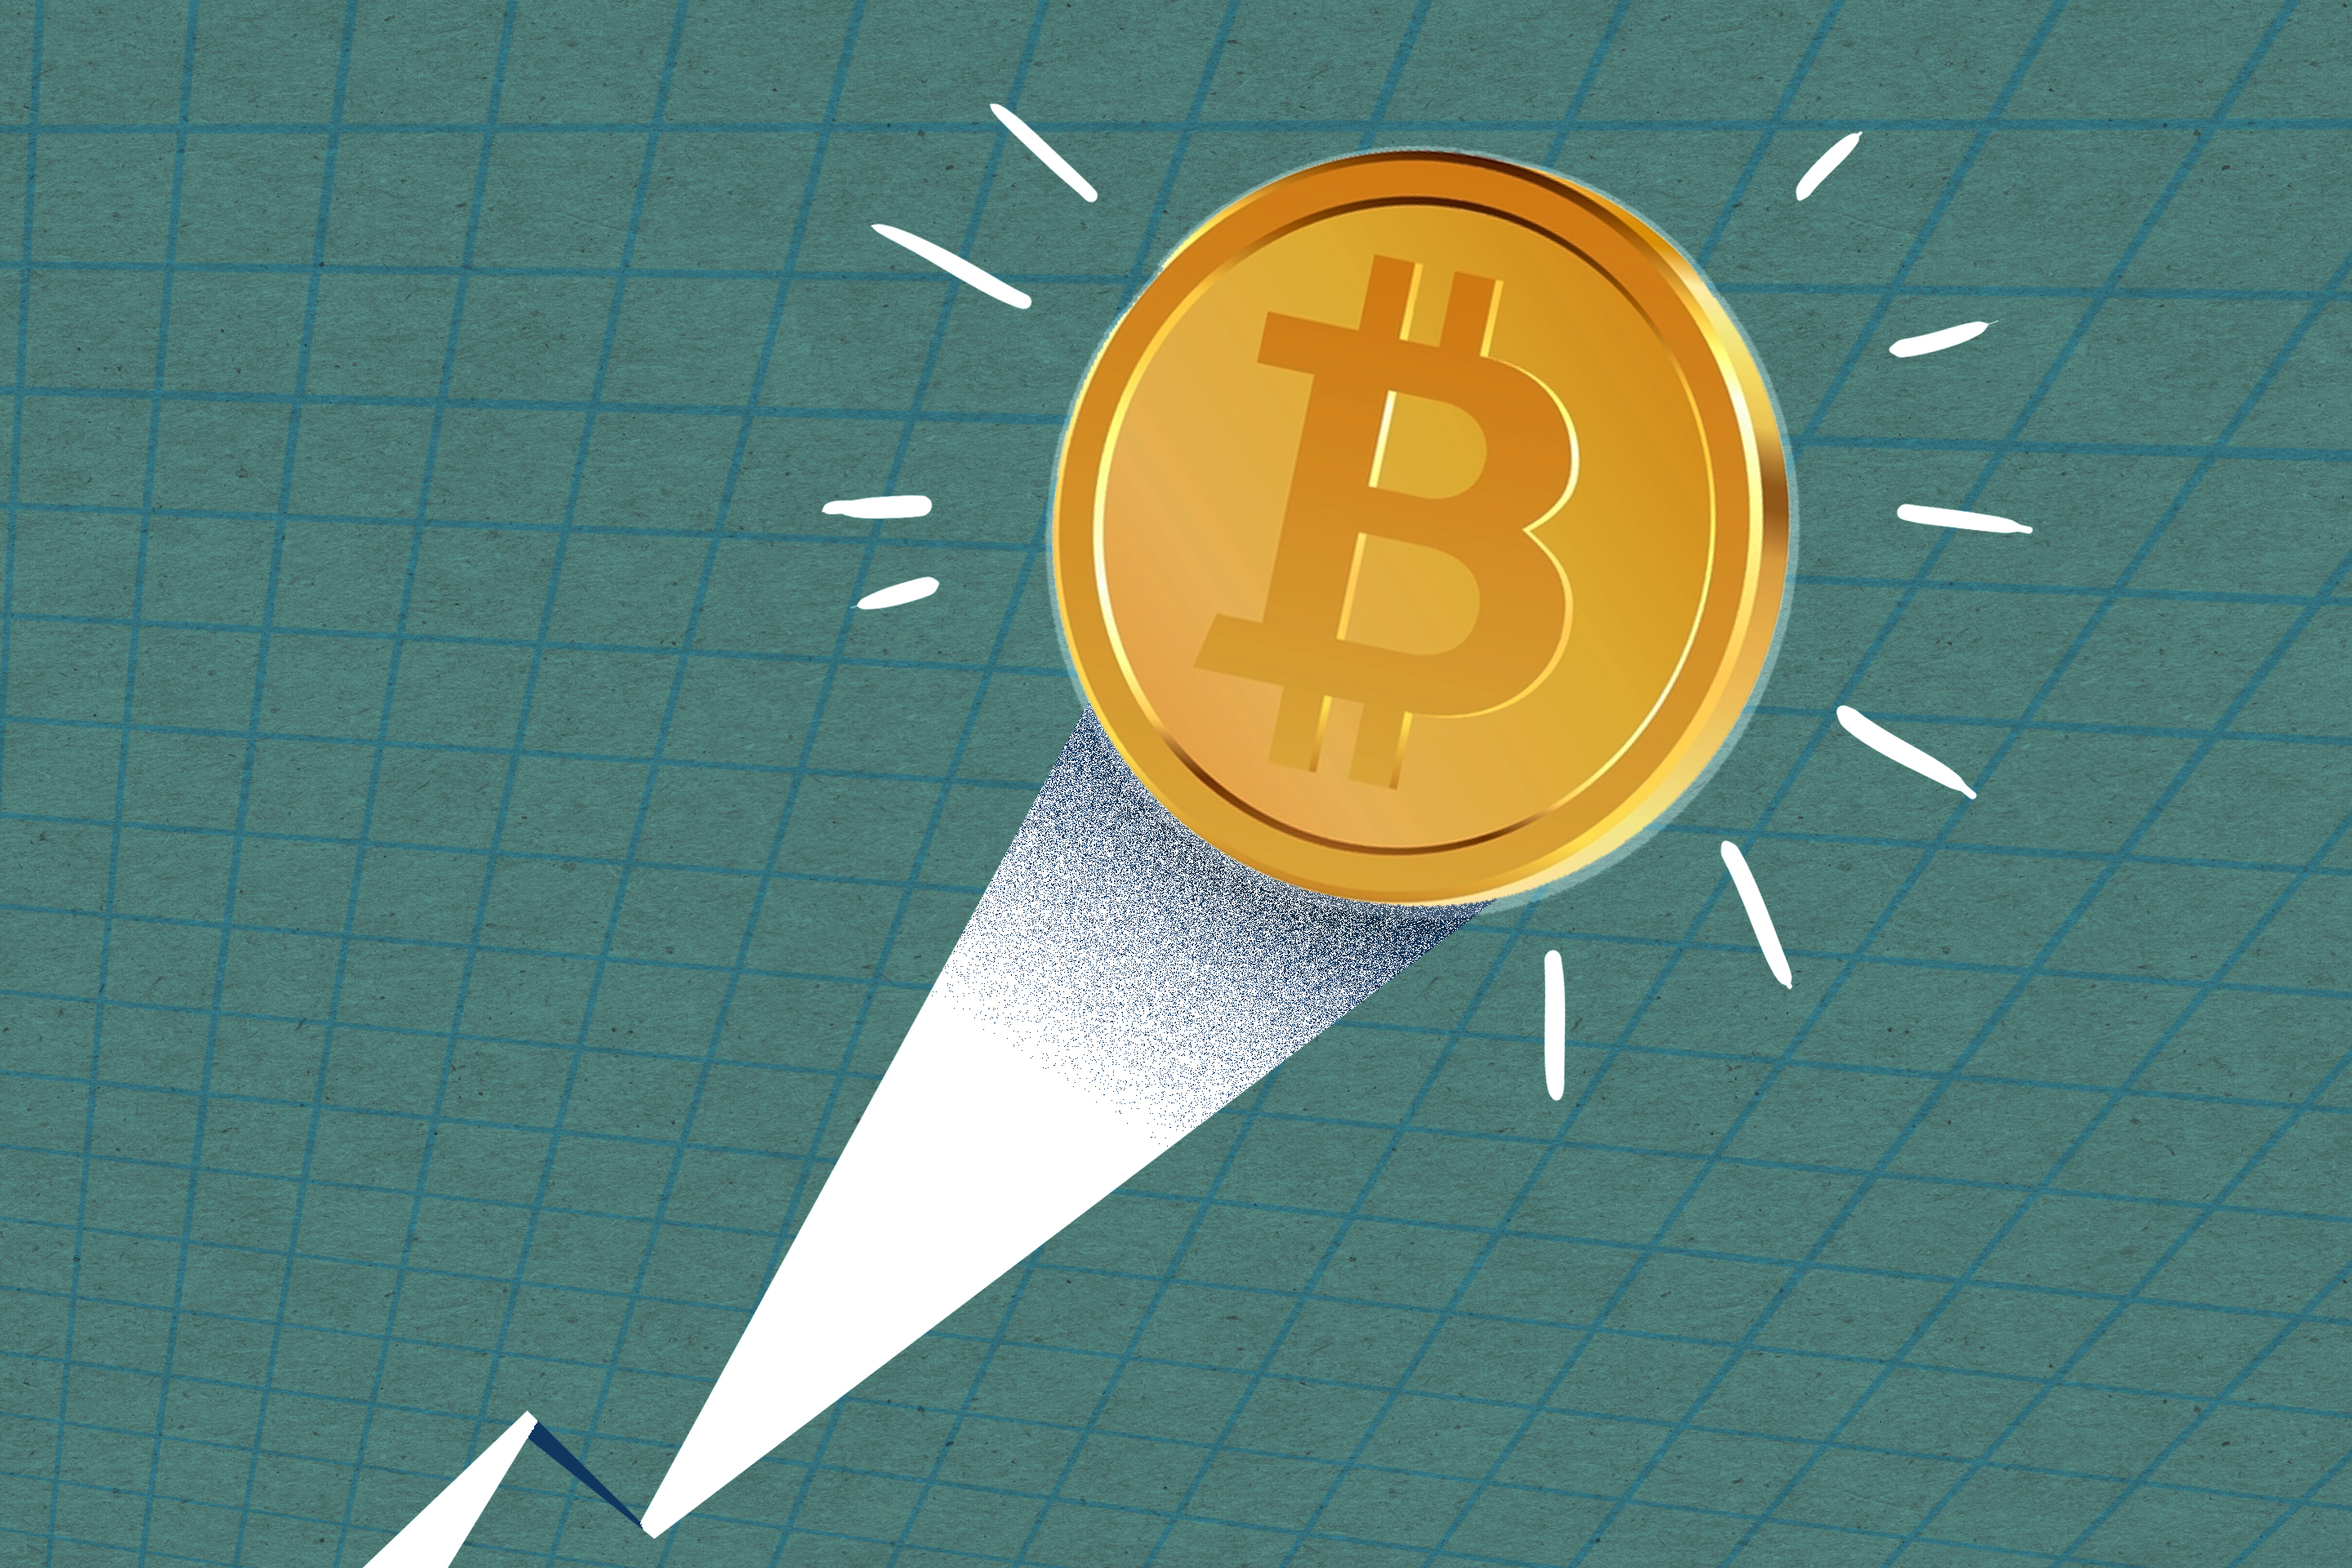 How investing in Bitcoin could ruin your life